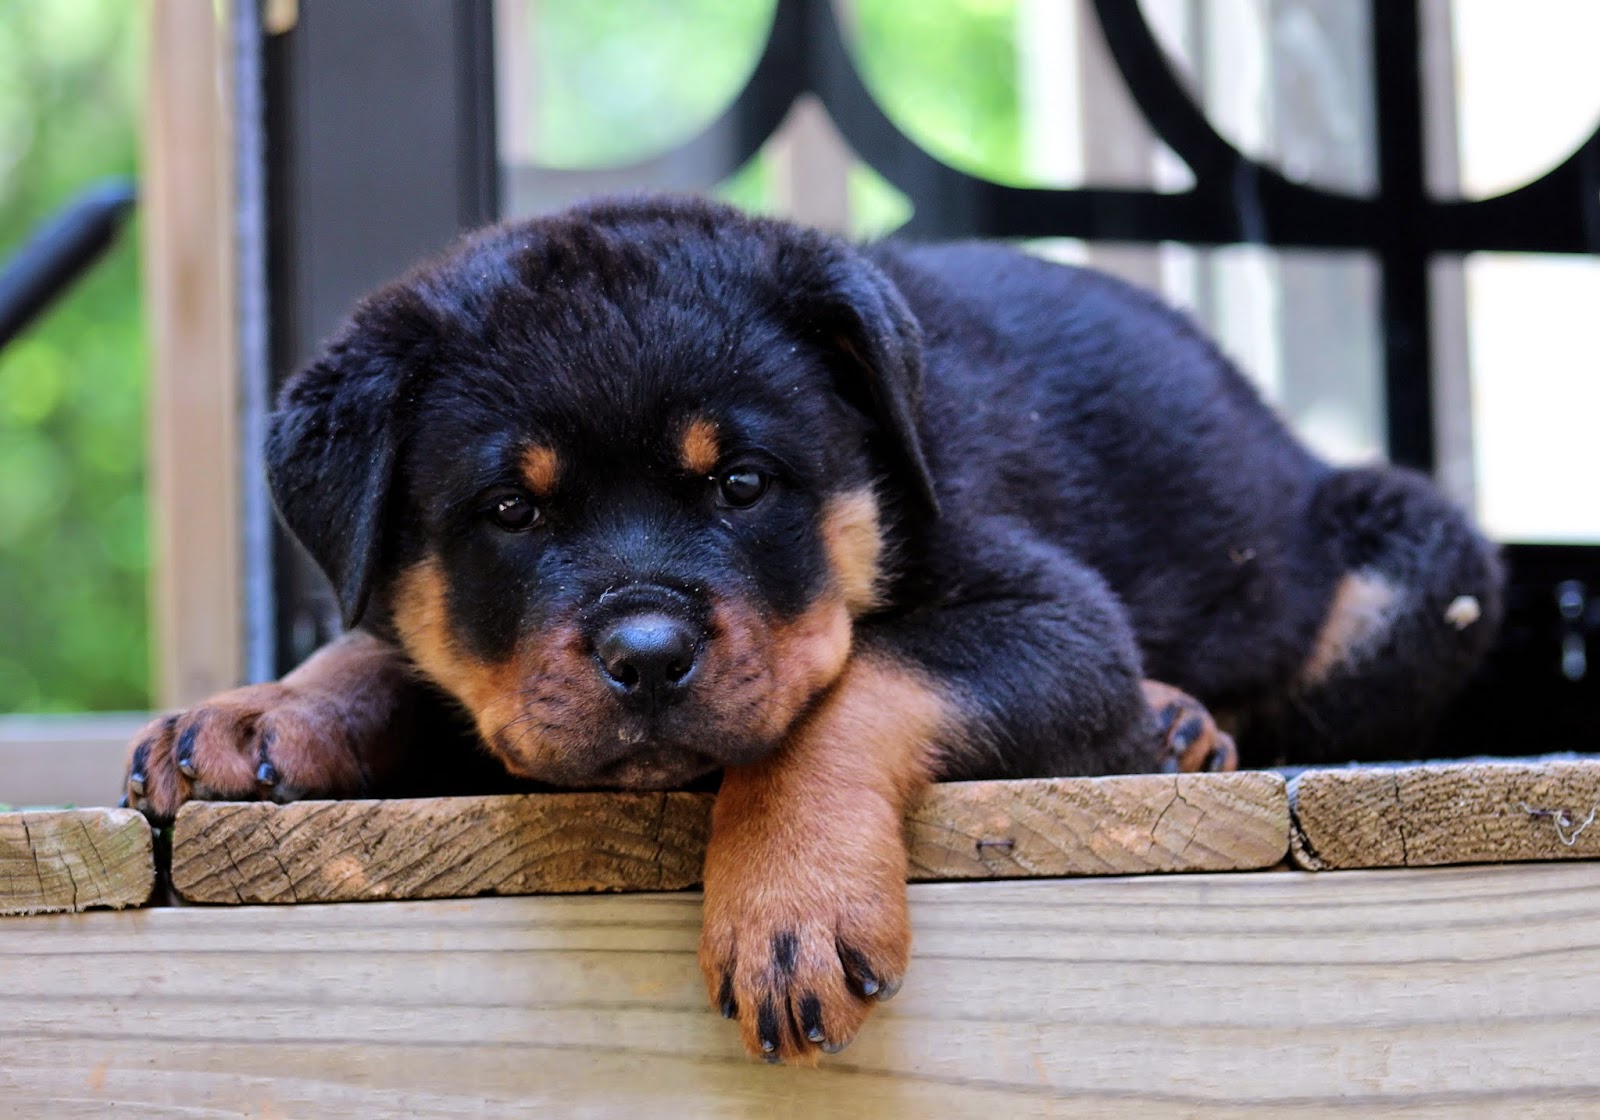 Rules of the Jungle Rottweiler puppy